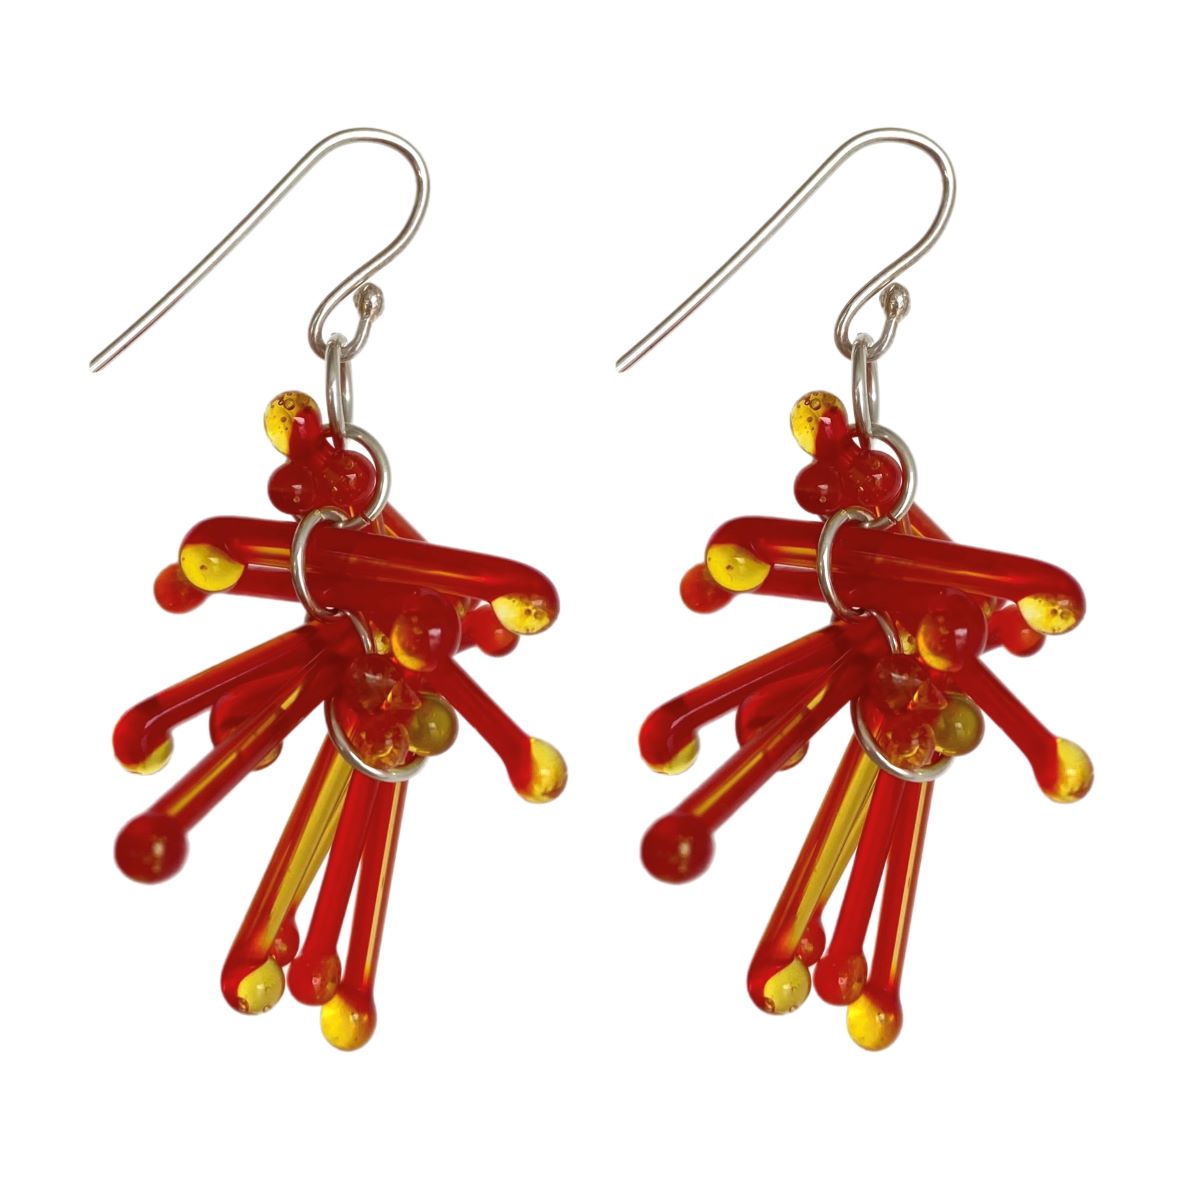 NOHLINE L'ECUYER - TRANSLUCENT RED LAMPWORK GLASS ROD EARRINGS - GLASS